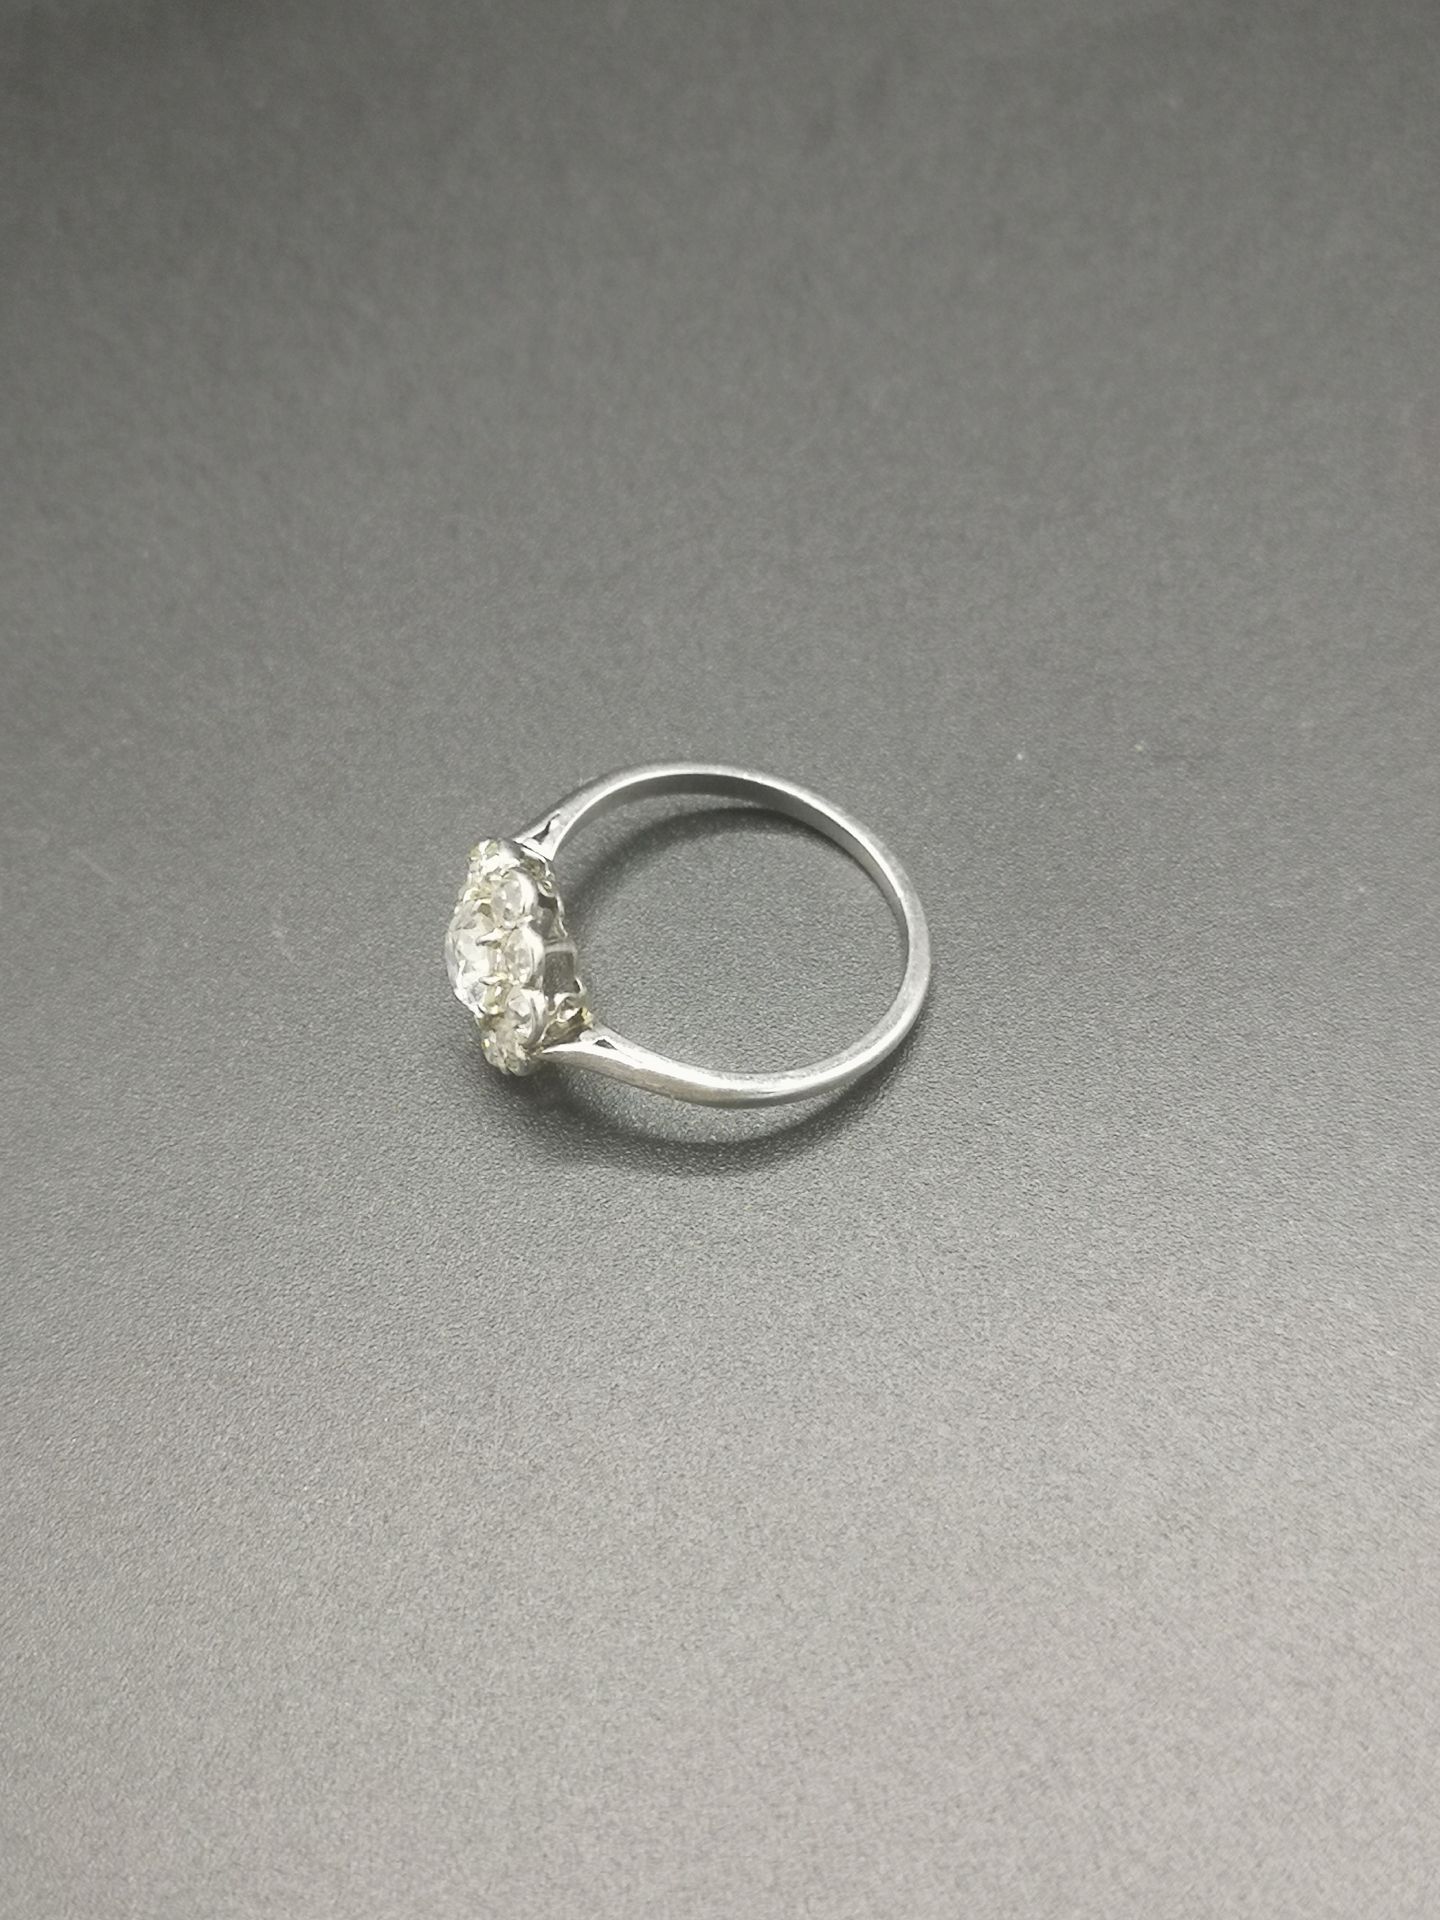 White metal and diamond cluster ring - Image 3 of 4